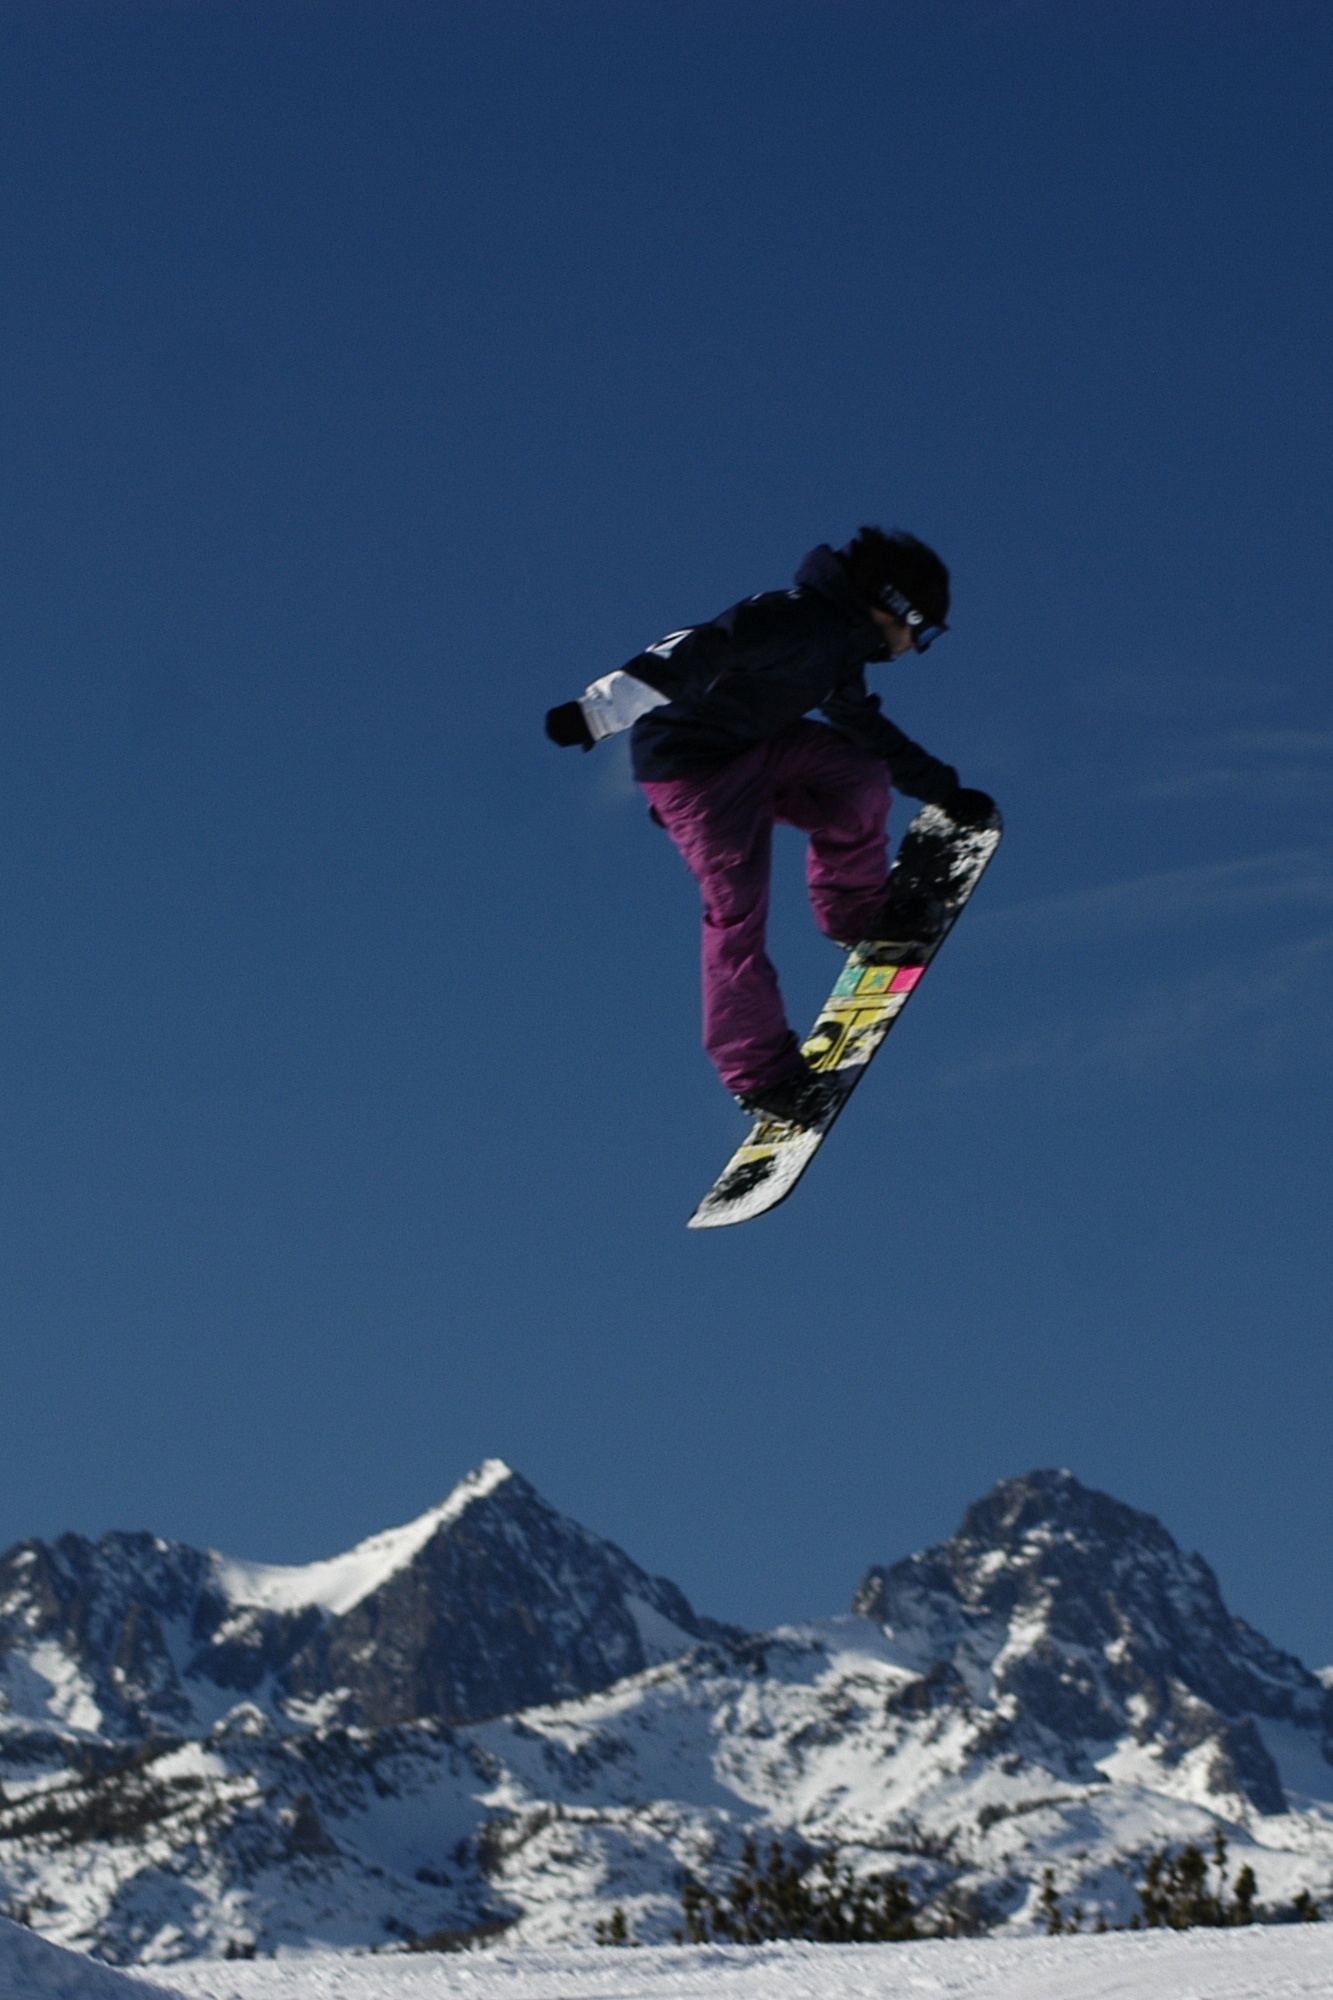 a man is doing a snowboard trick in the air